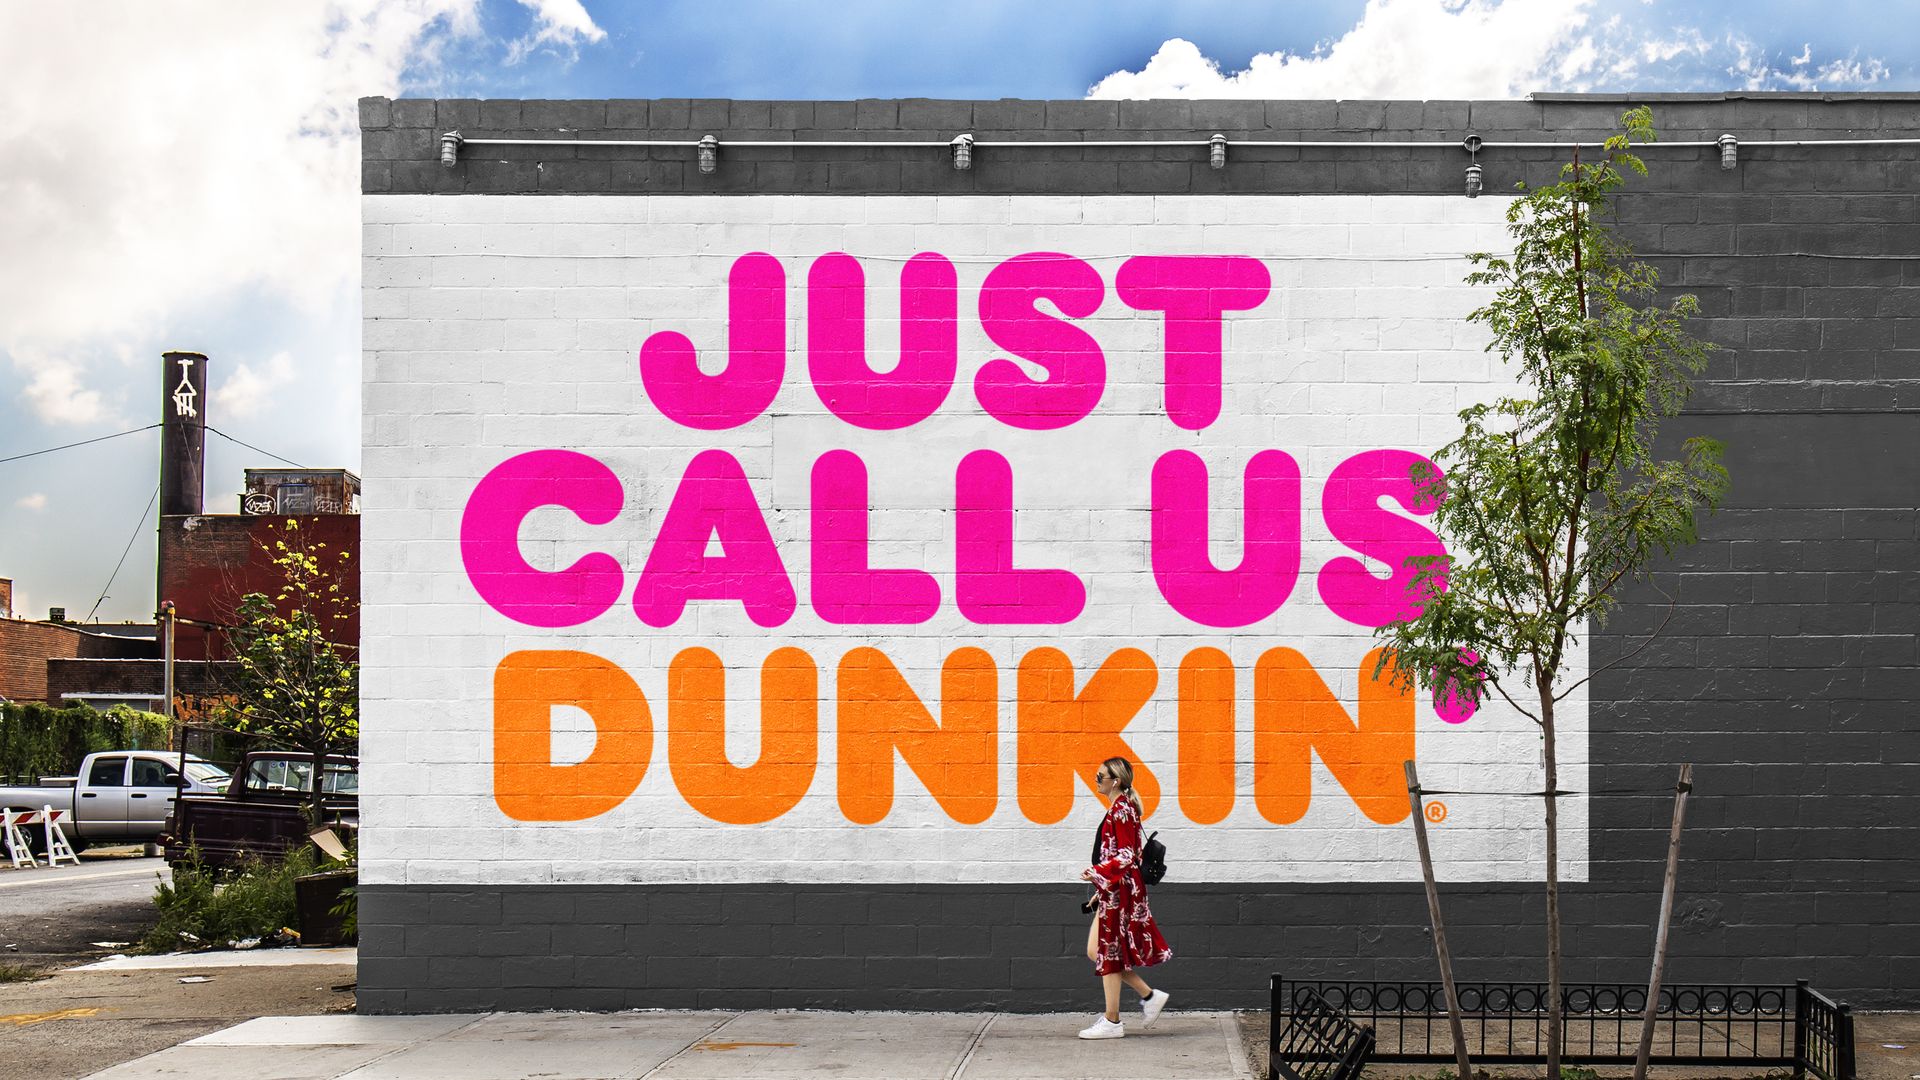 A woman walks by a building with a large sign on the outside that says JUST CALL US DUNKIN'